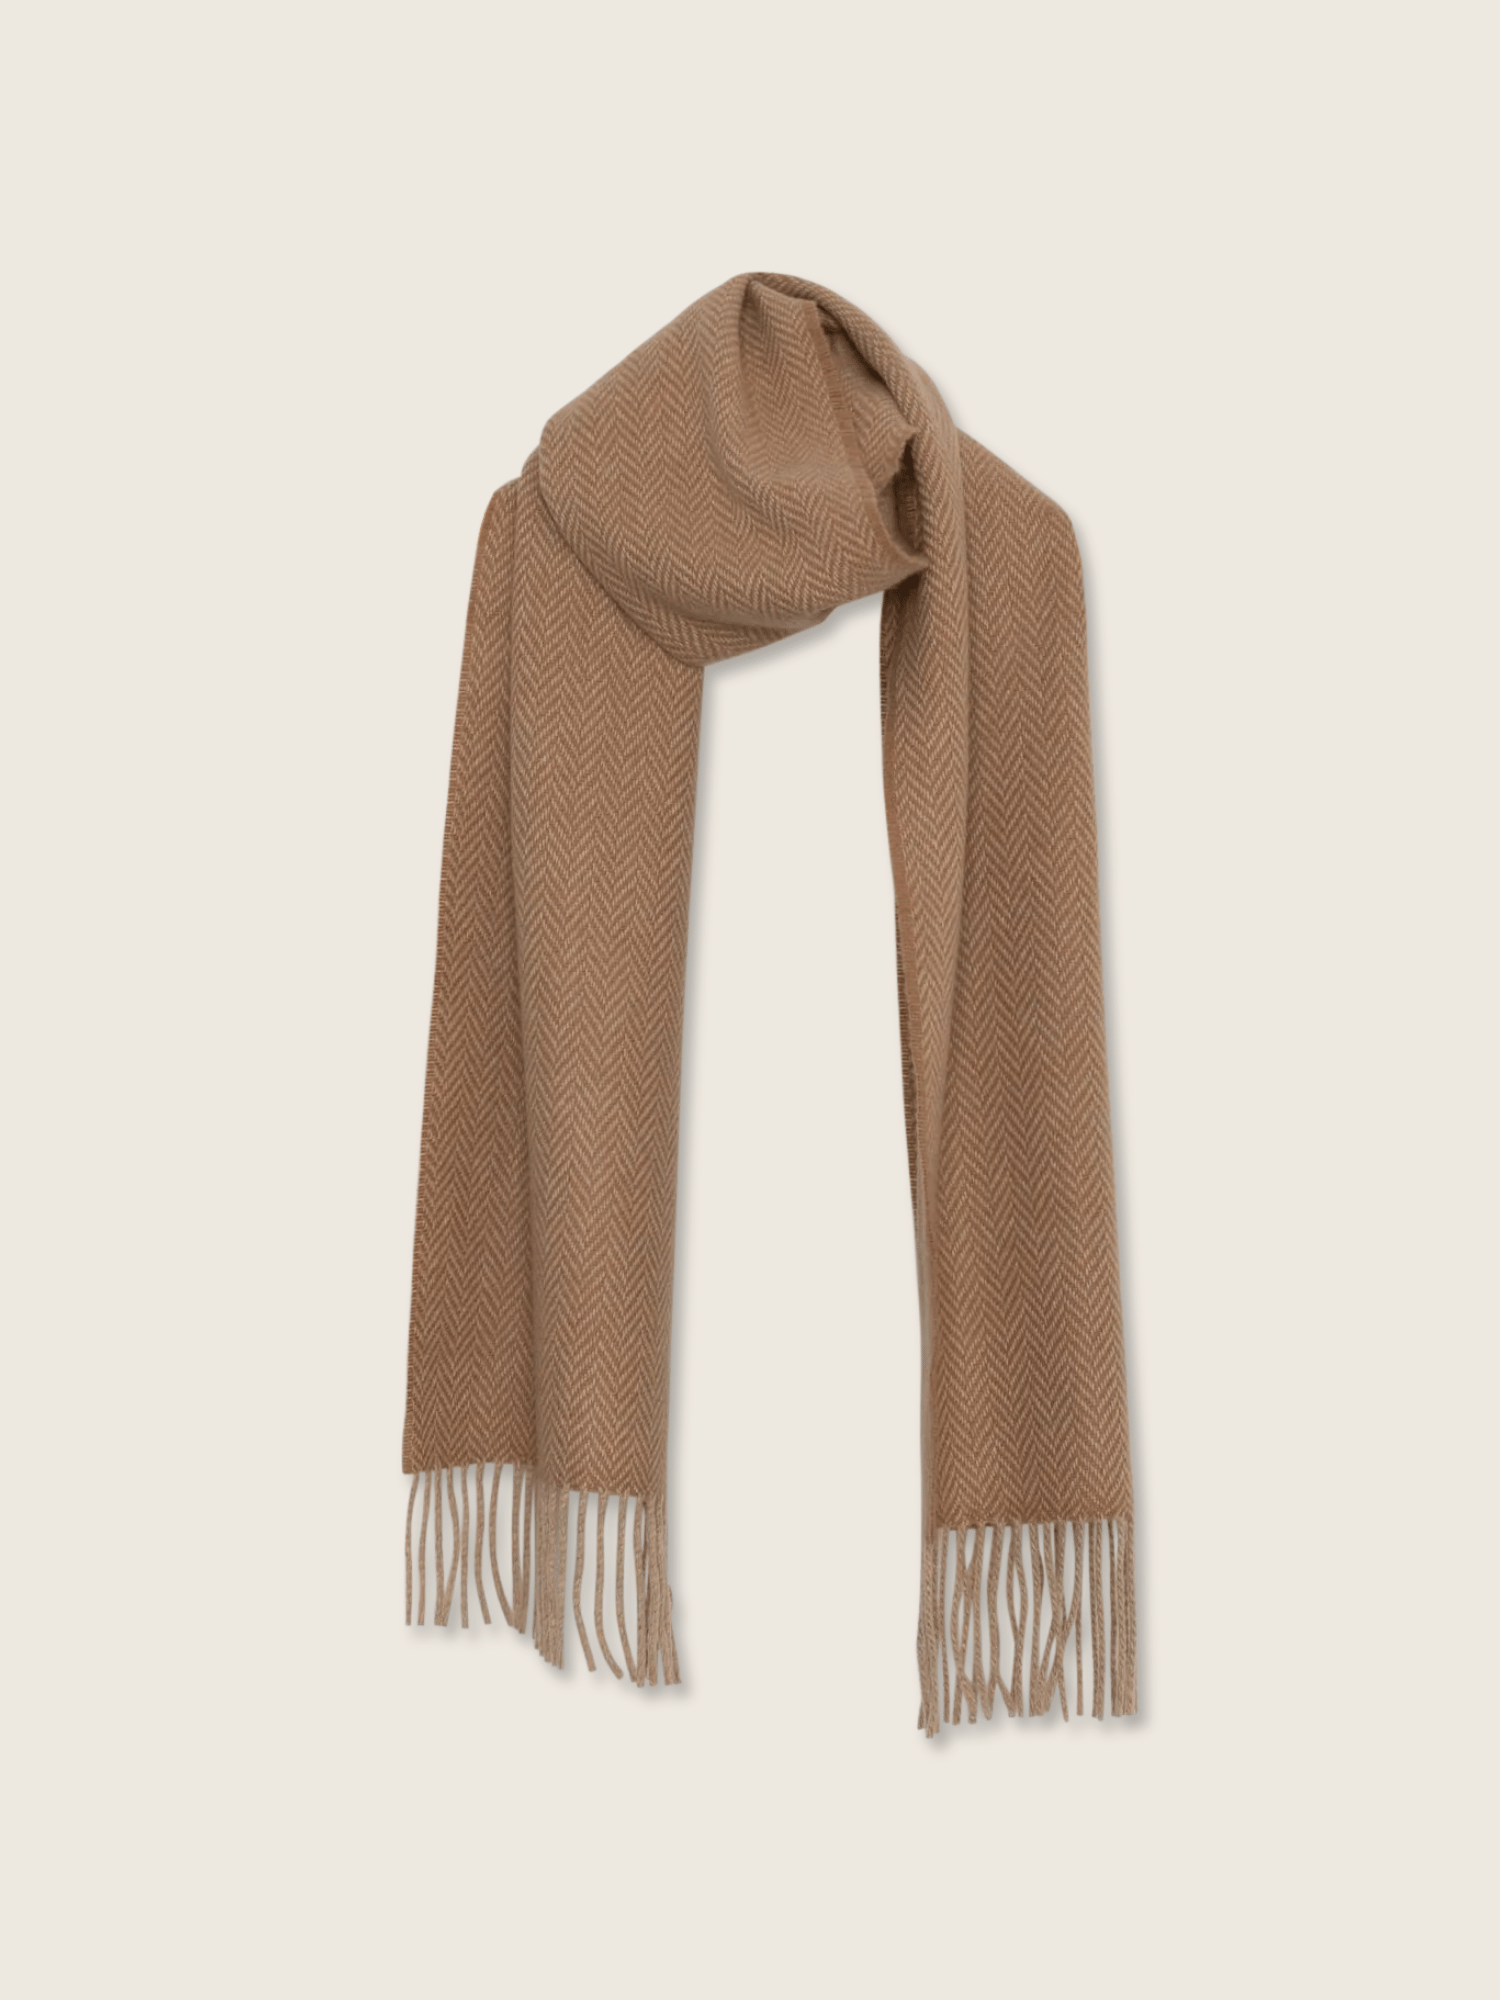 Highclere Cashmere Scarf